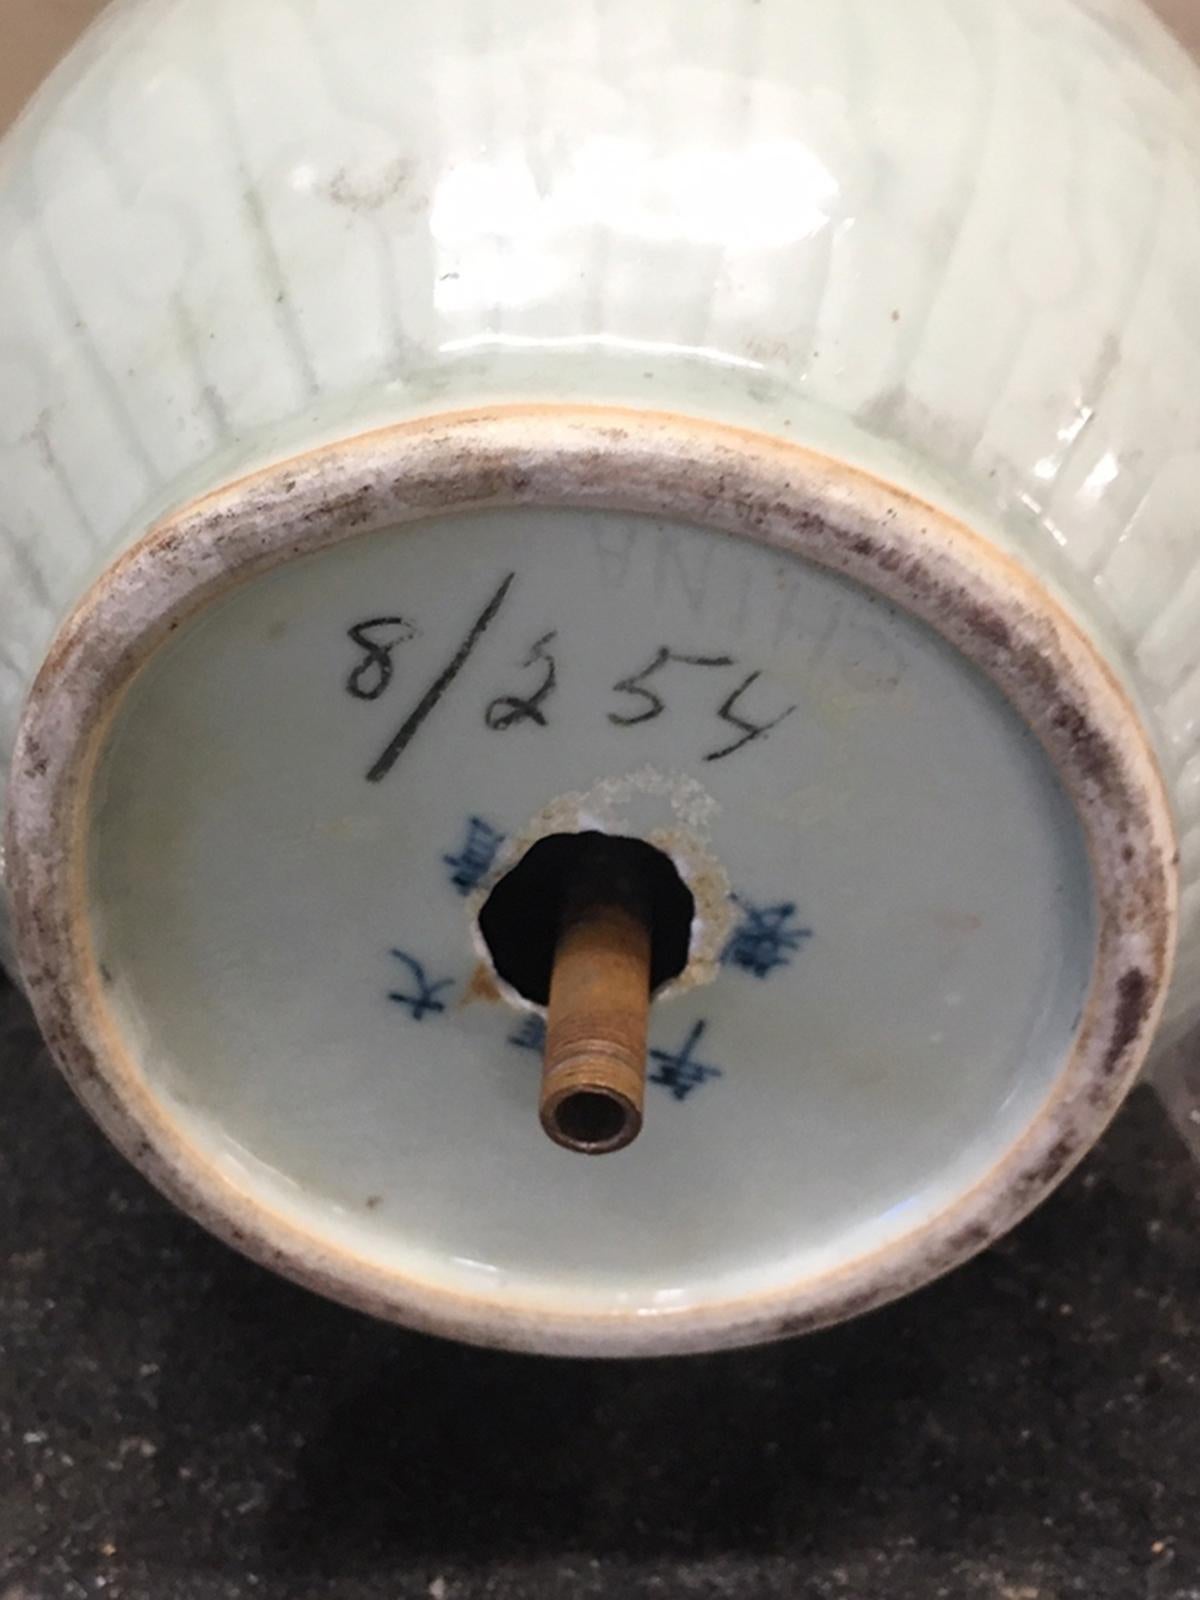 19th century Chinese Celadon glazed porcelain lamp with old base, signed
brand new wiring.